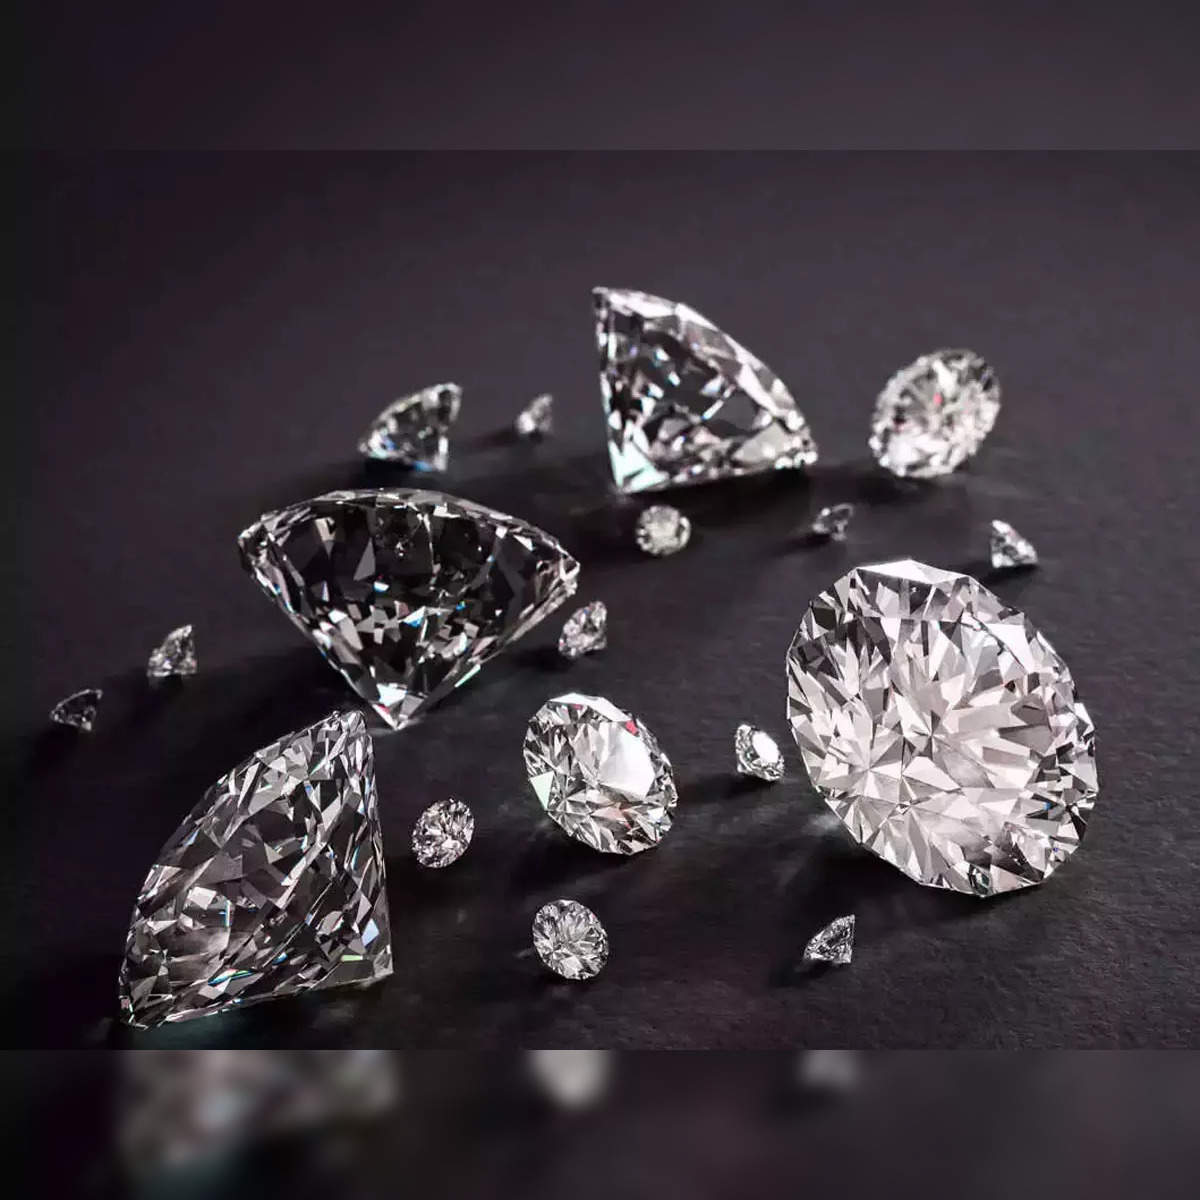 Solved DE BEERS GROUP: DIAMONDS FOR A NEW GENERATION Since